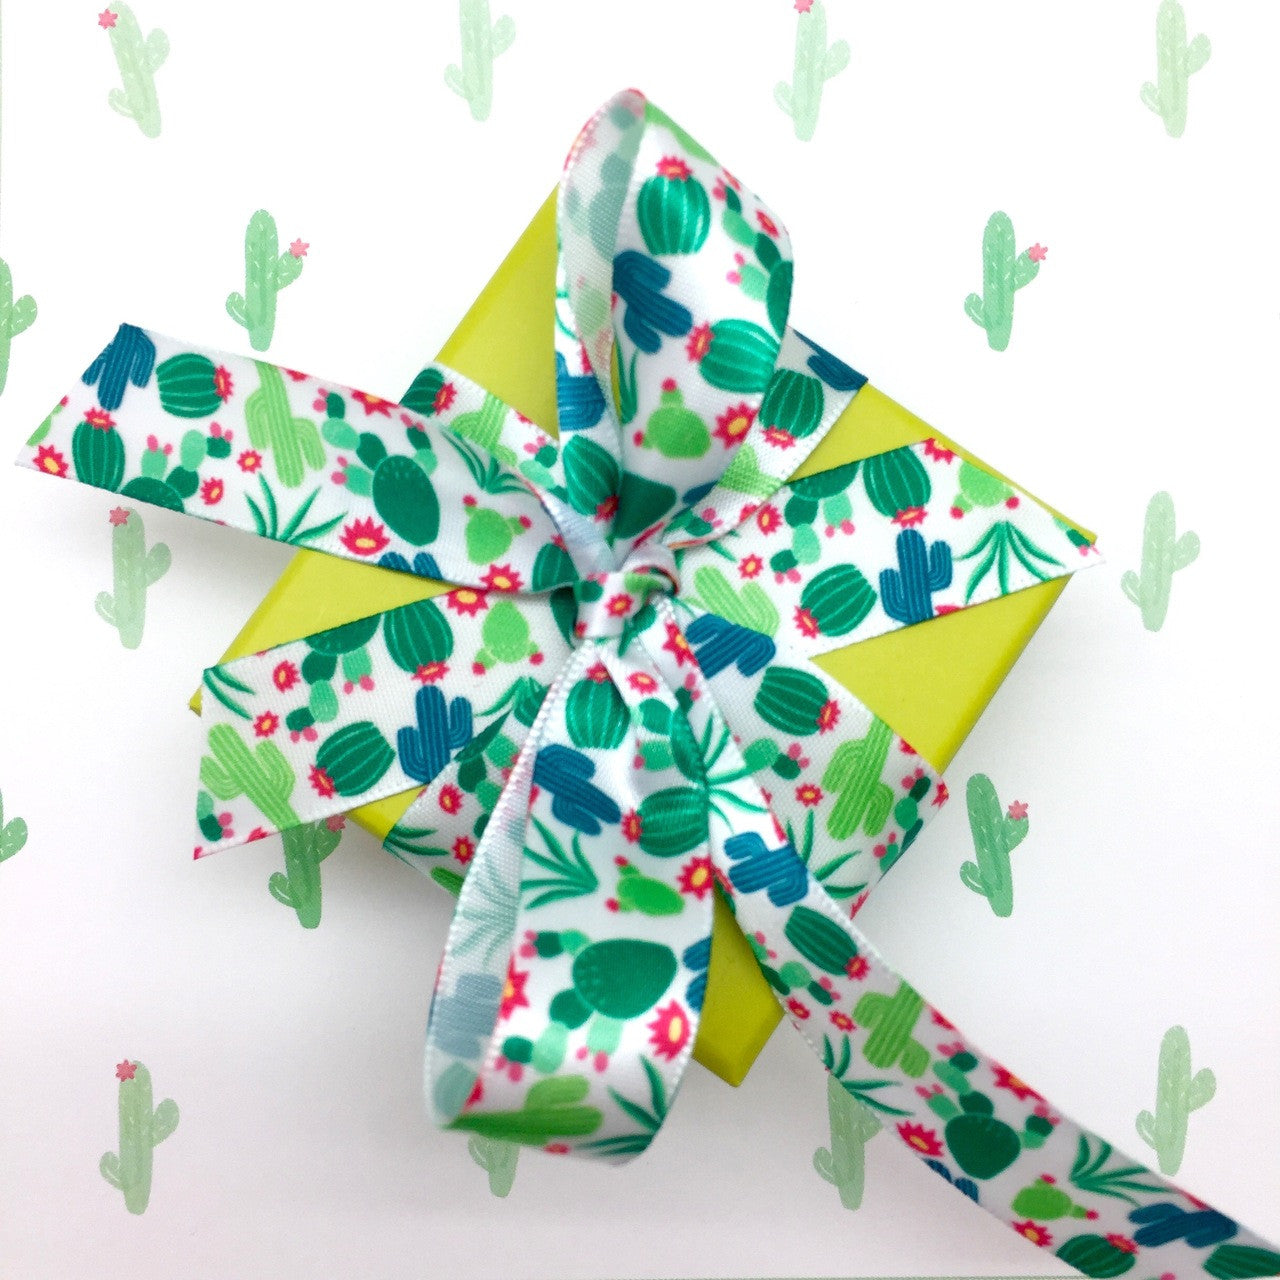 Fun little favors for a cactus themed party tied with our ribbon really makes a great addition to the fiesta!